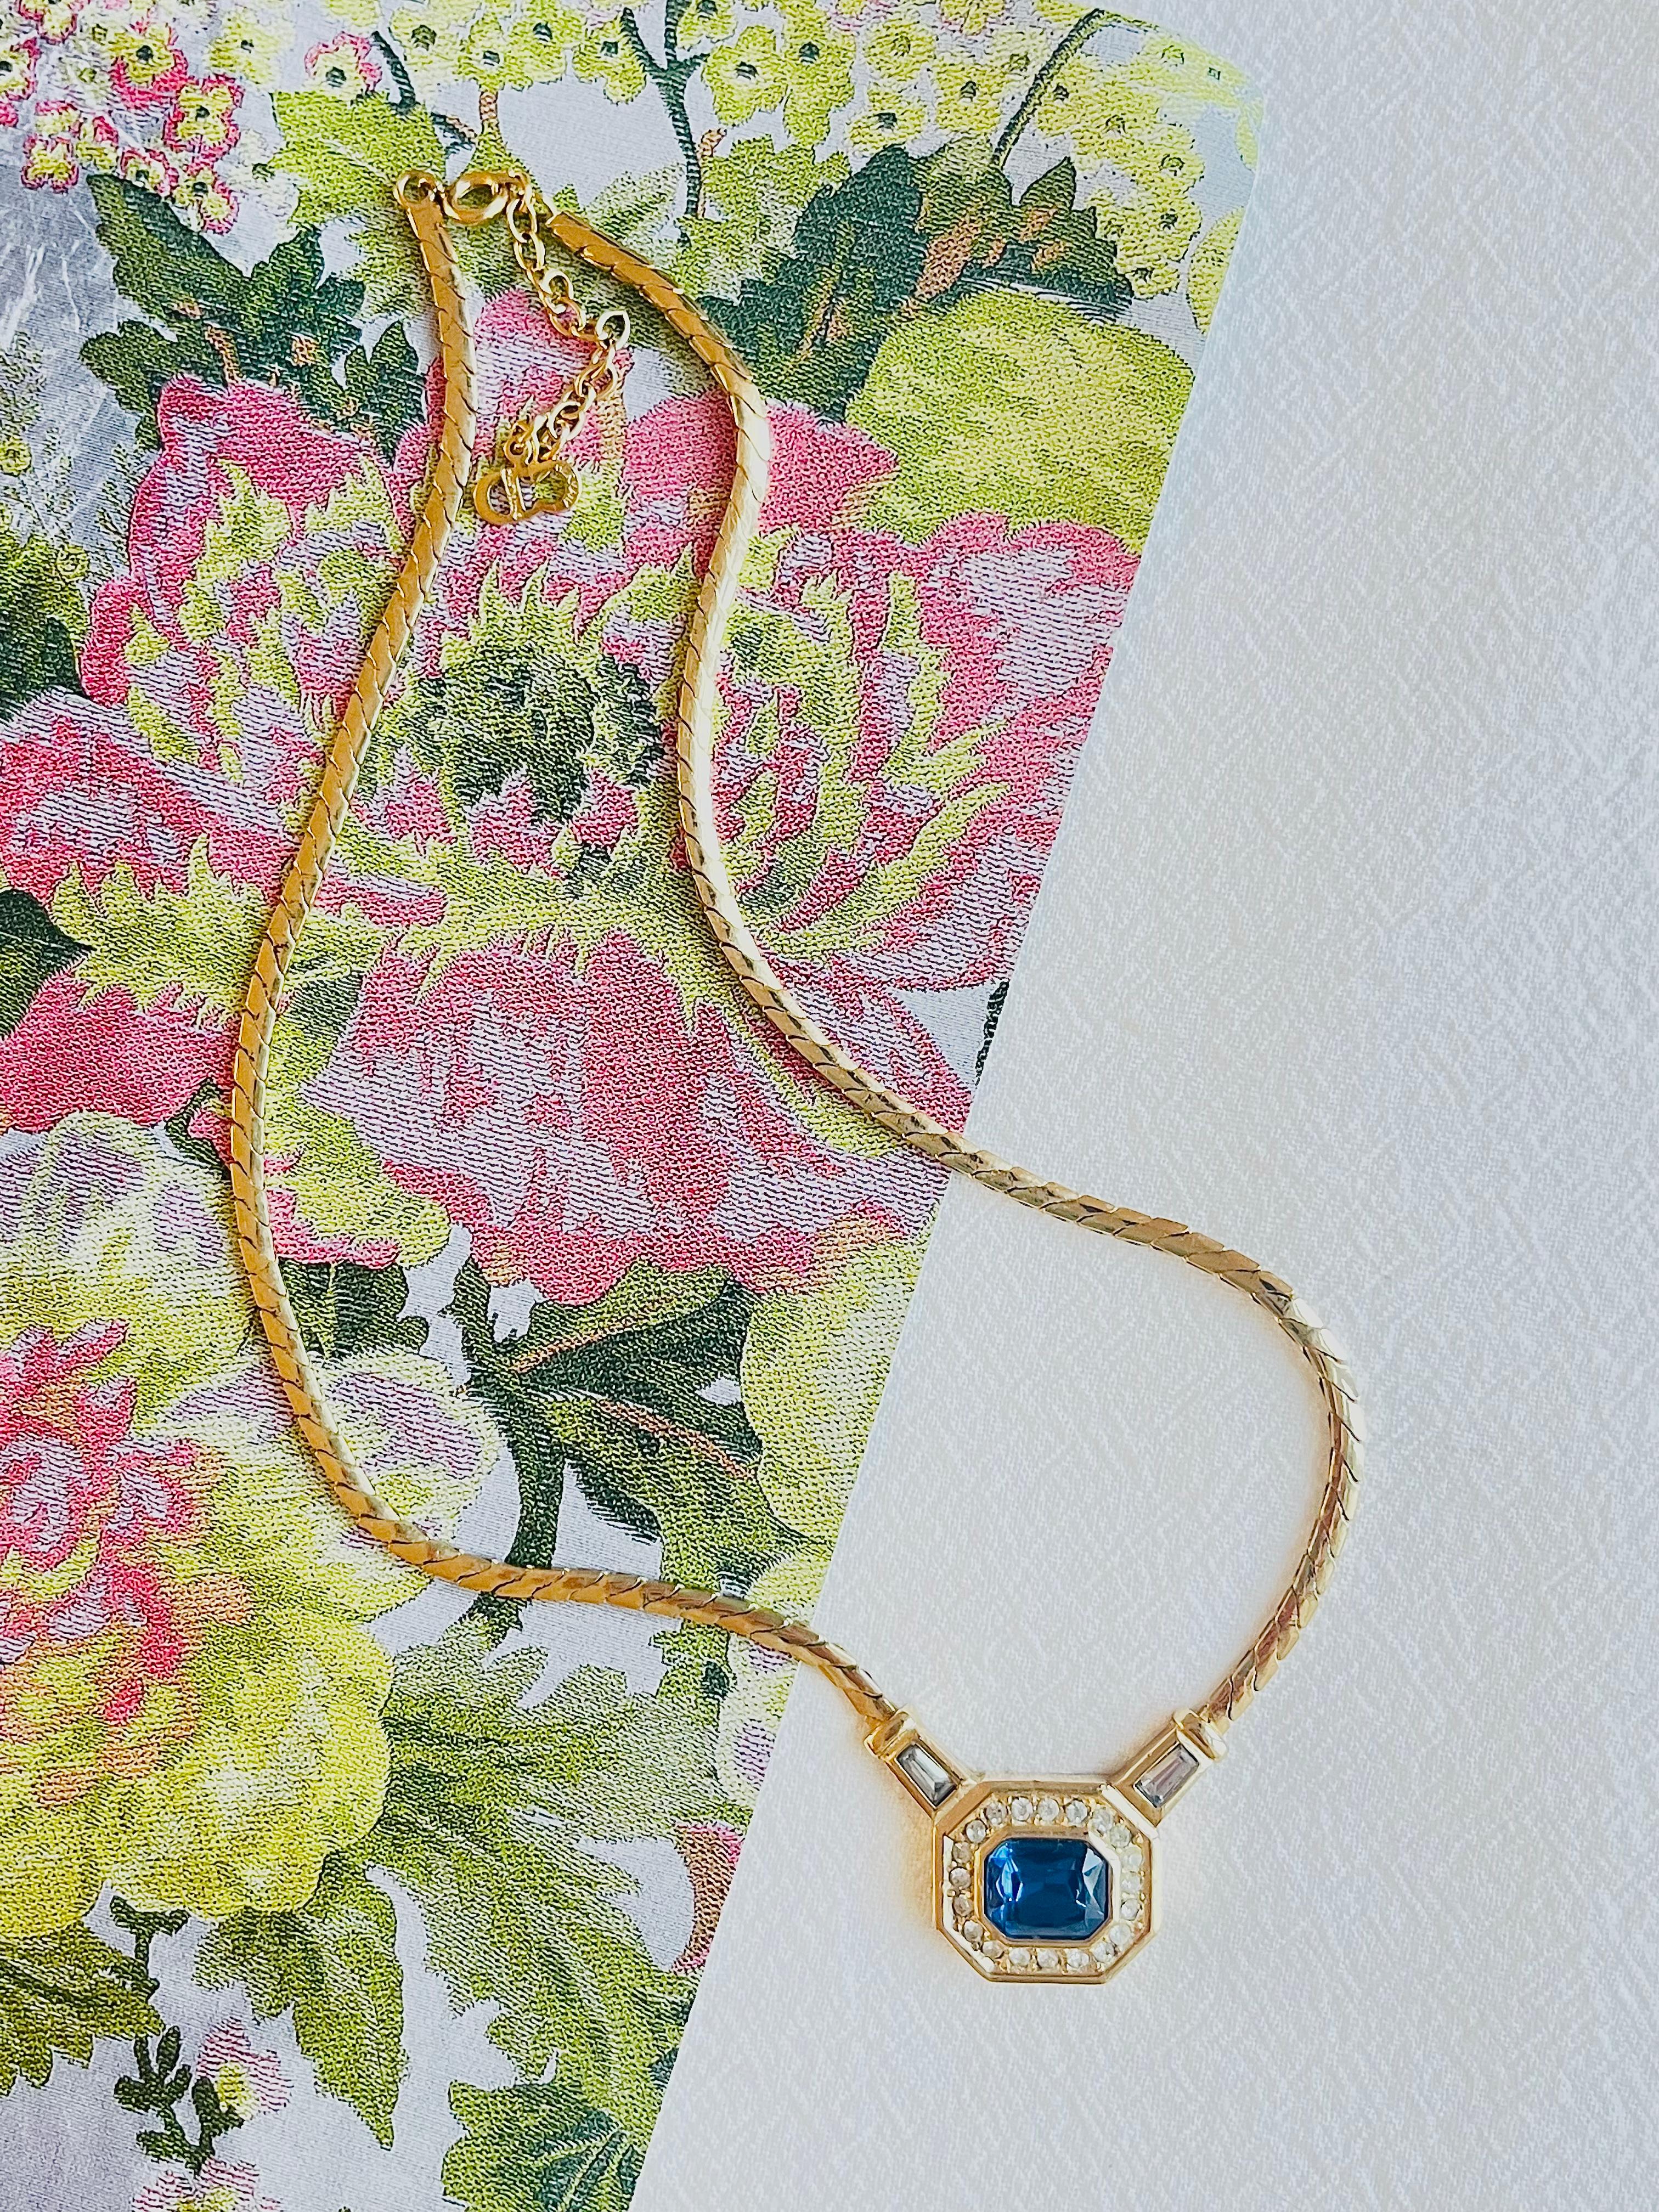 Very good condition. Light scratches or colour loss, barely noticeable. 

Crafted from gold plated brass with a snake chain, this necklace from Christian Dior is adorned with a sapphire navy blue gemstone embellishment, punctuated with Swarovski